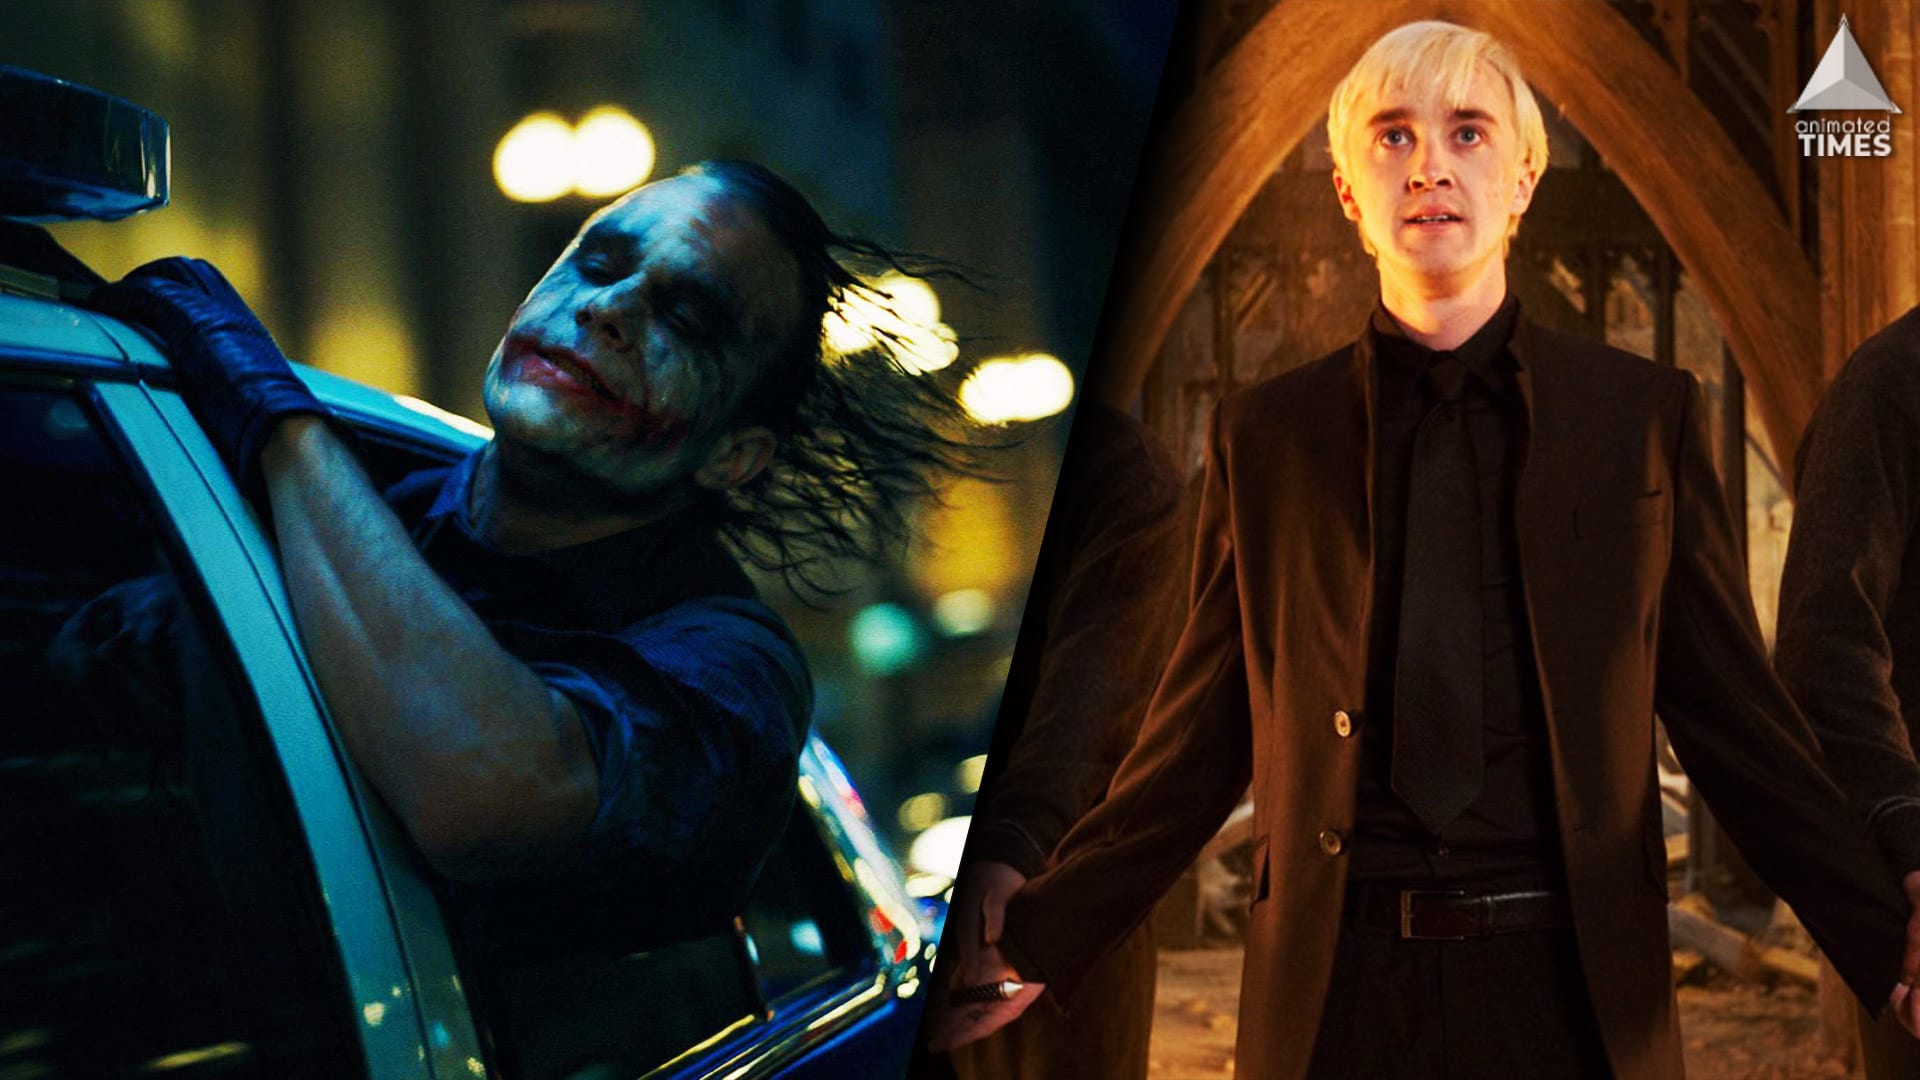 14 Antagonists Who Stole The Movie, Even Though They Hardly Had Any Screen Time